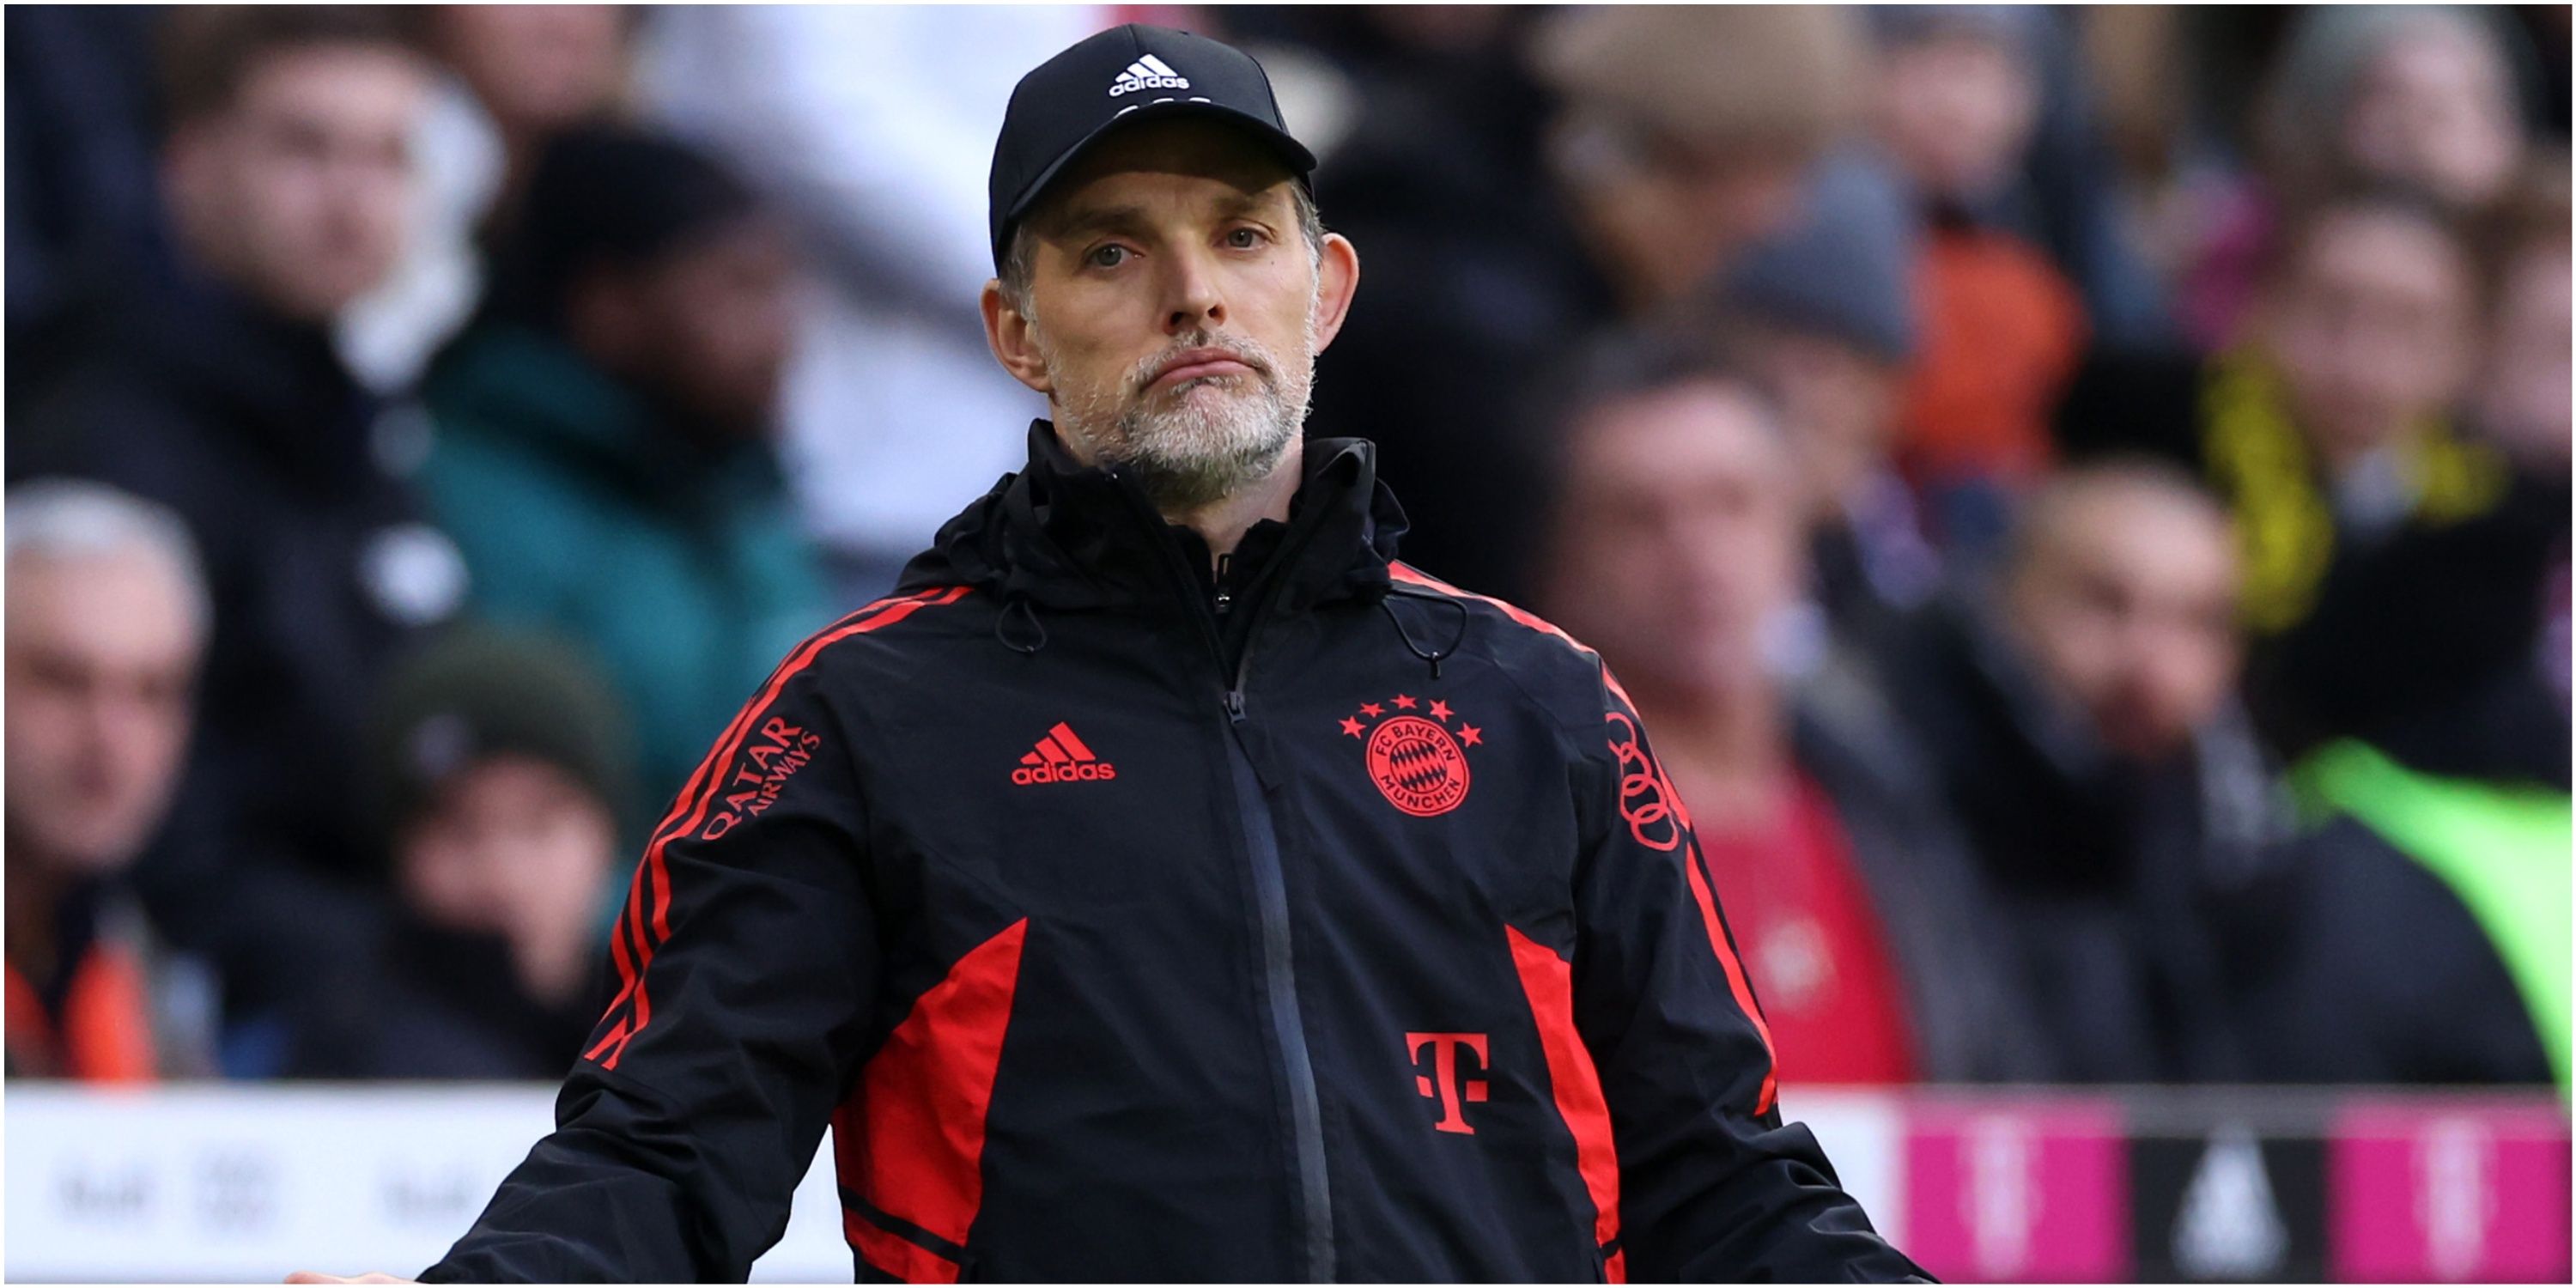  A photo of Bayern Munich's manager Thomas Tuchel looking concerned on the sidelines during a match, with the Bayern Munich logo in the background.